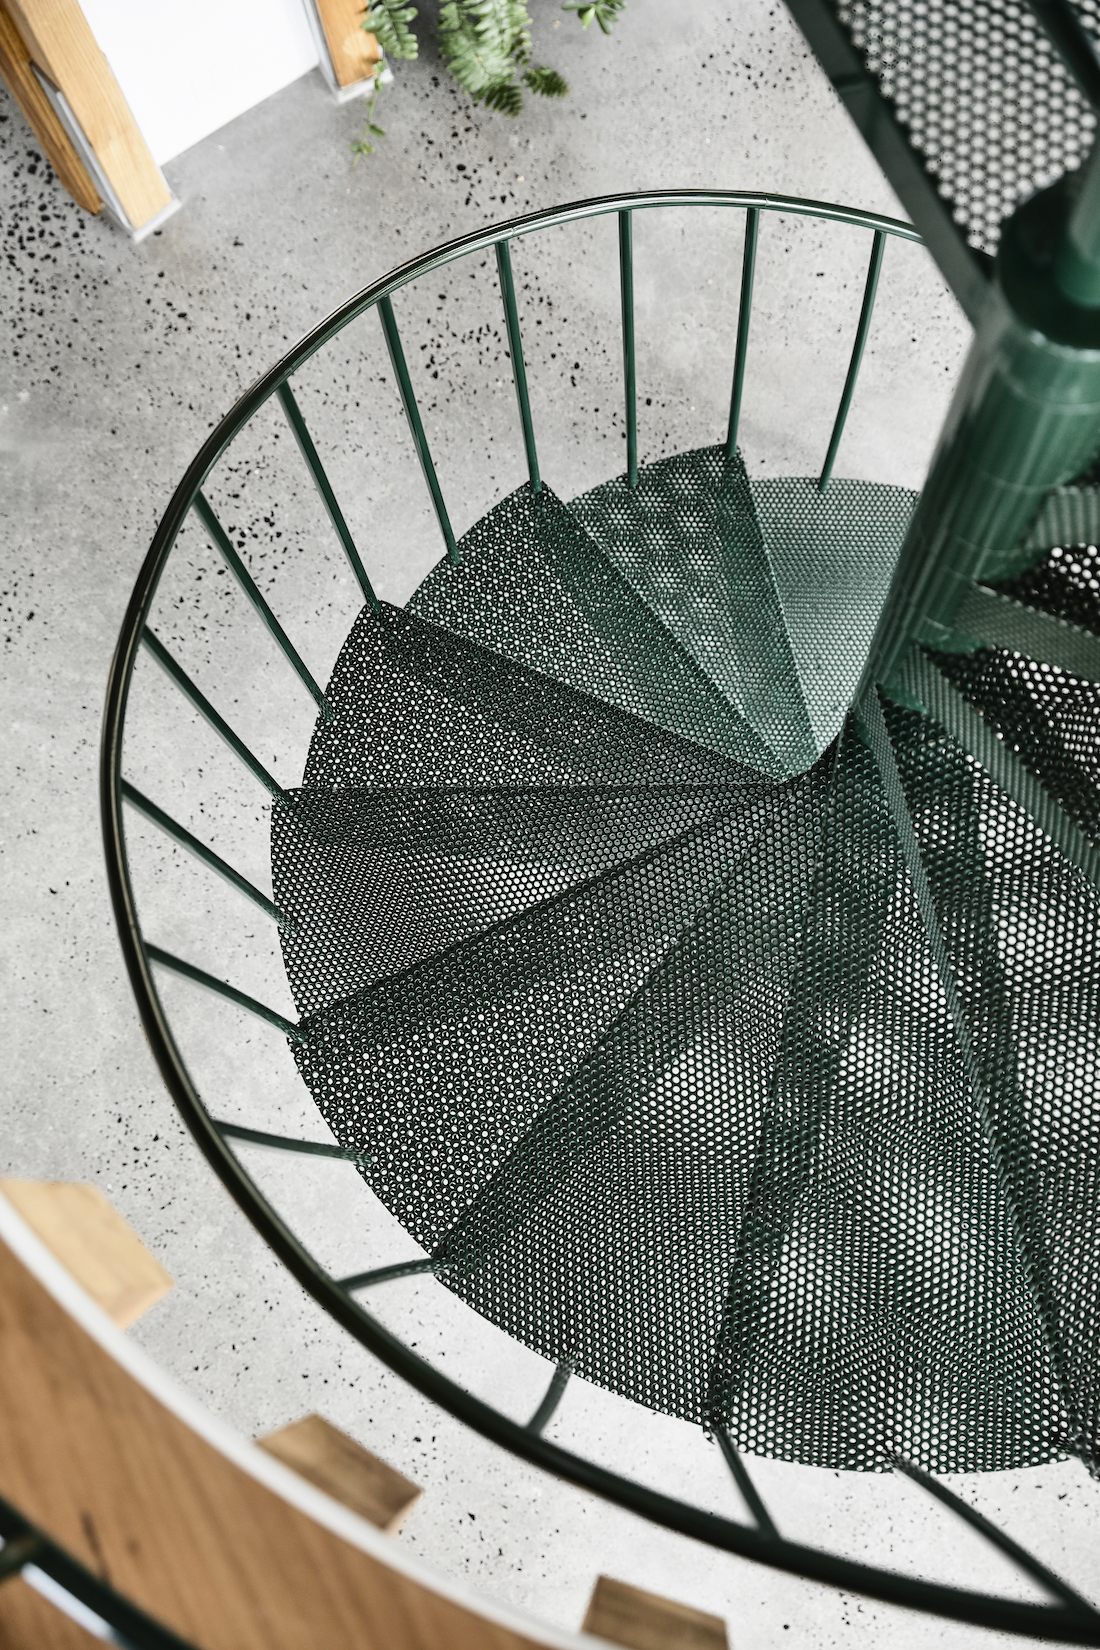 Green honeycomb spiral staircase